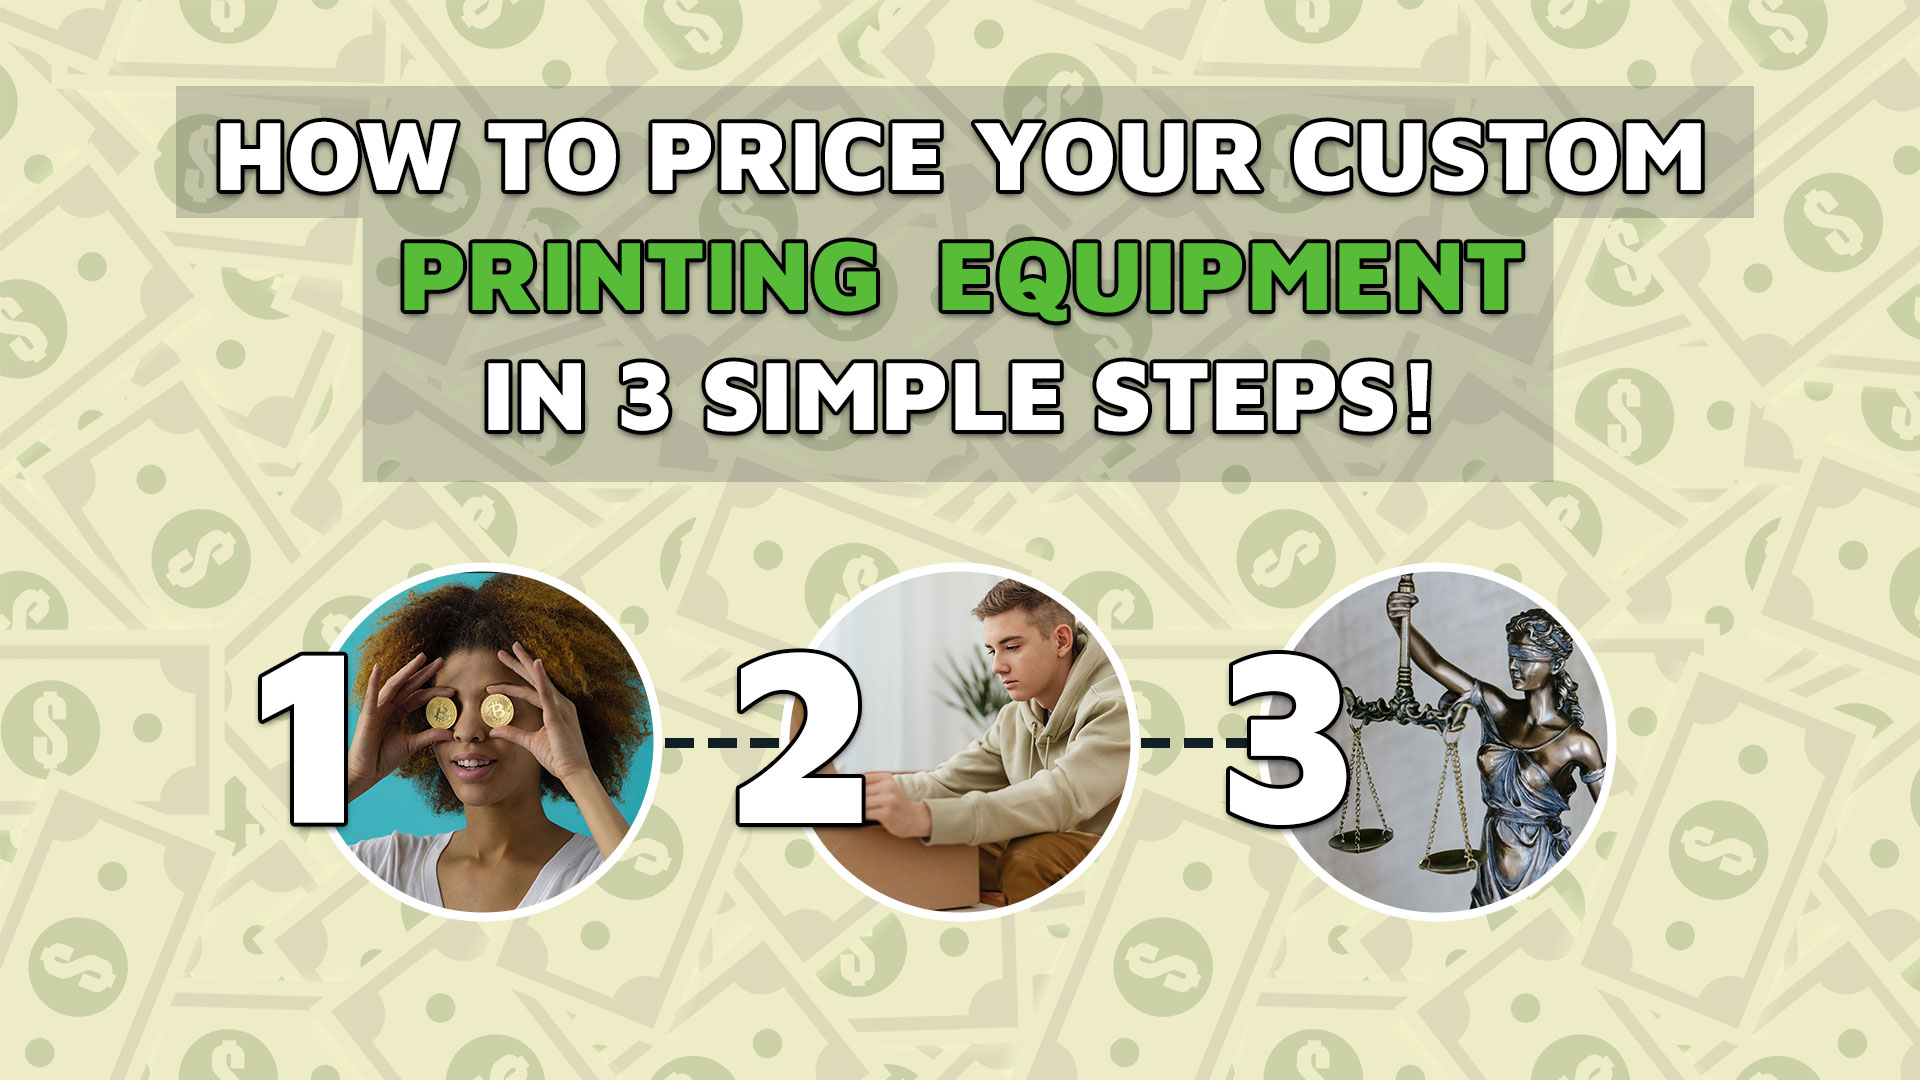 How to Price Your Custom Printing Equipment in 3 Simple Steps!